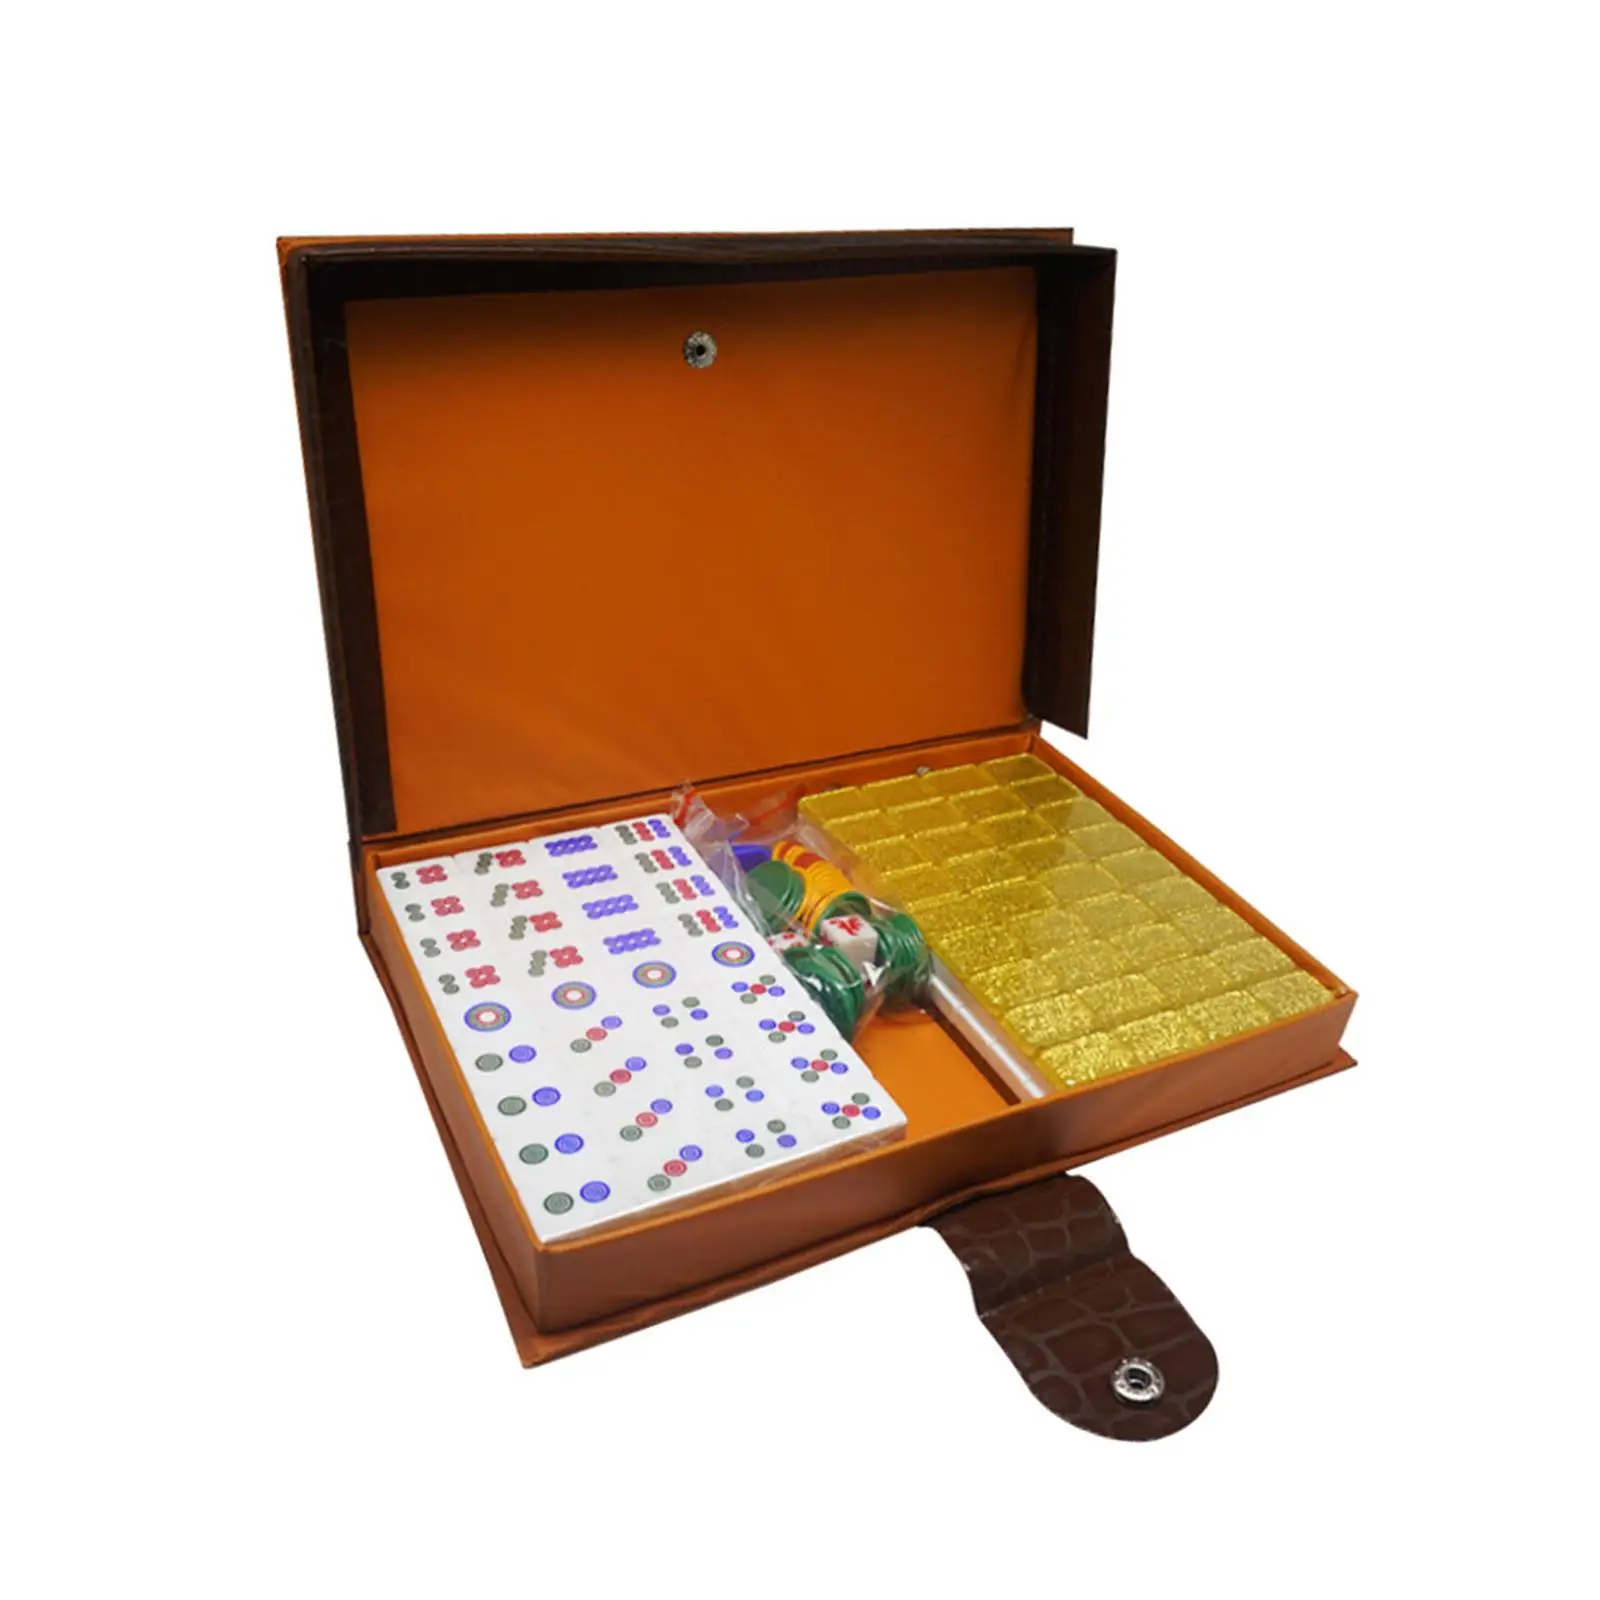 Mini Chinese Guangdong Mahjong Set with Carry Case Acrylic Easy to Read mAh Jongg for Game Nights Gatherings Leisure Party Home